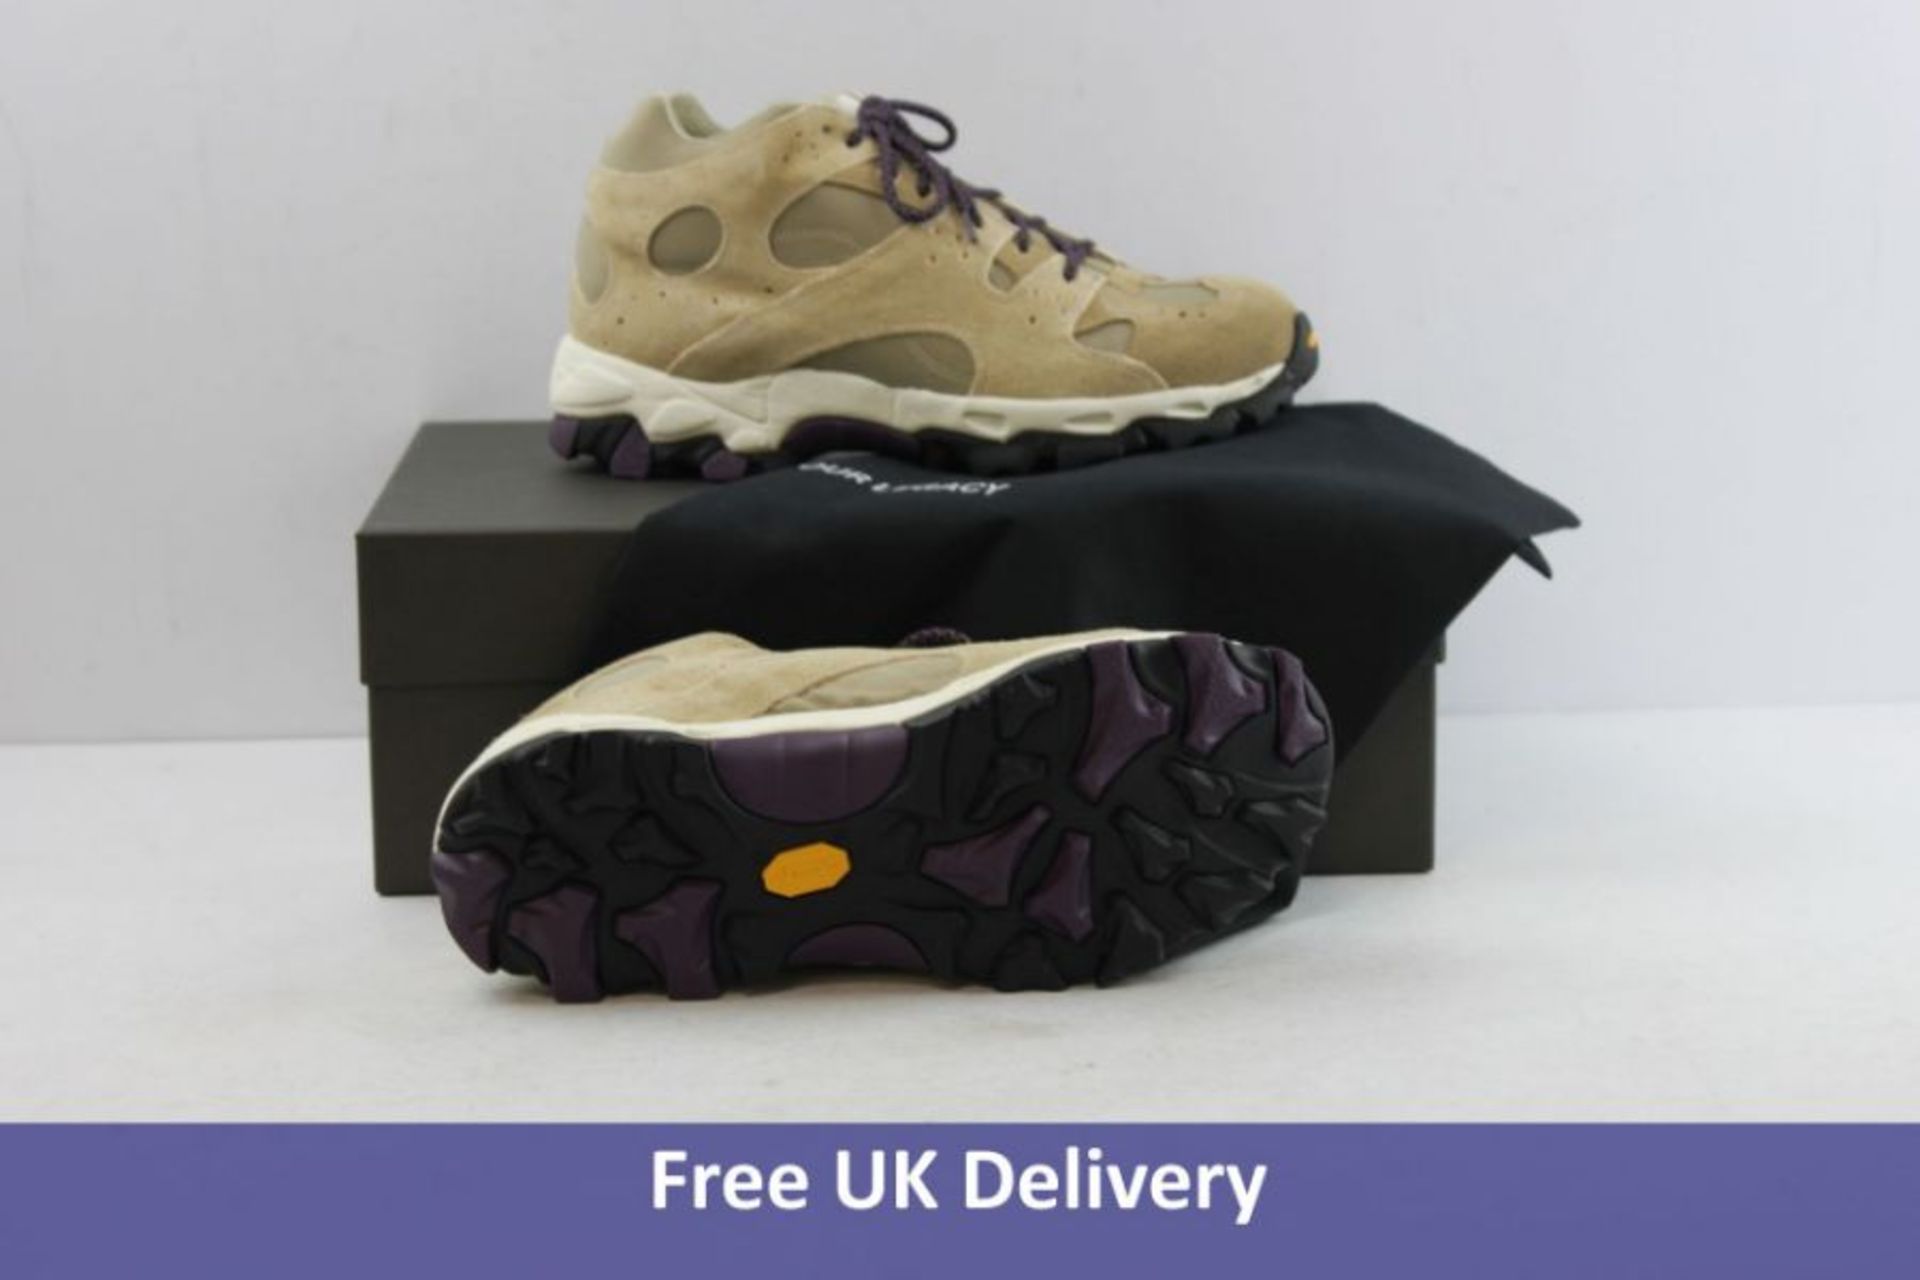 Our Legacy, Cage Sneaker, Walking Shoes, Sawdust, UK 7